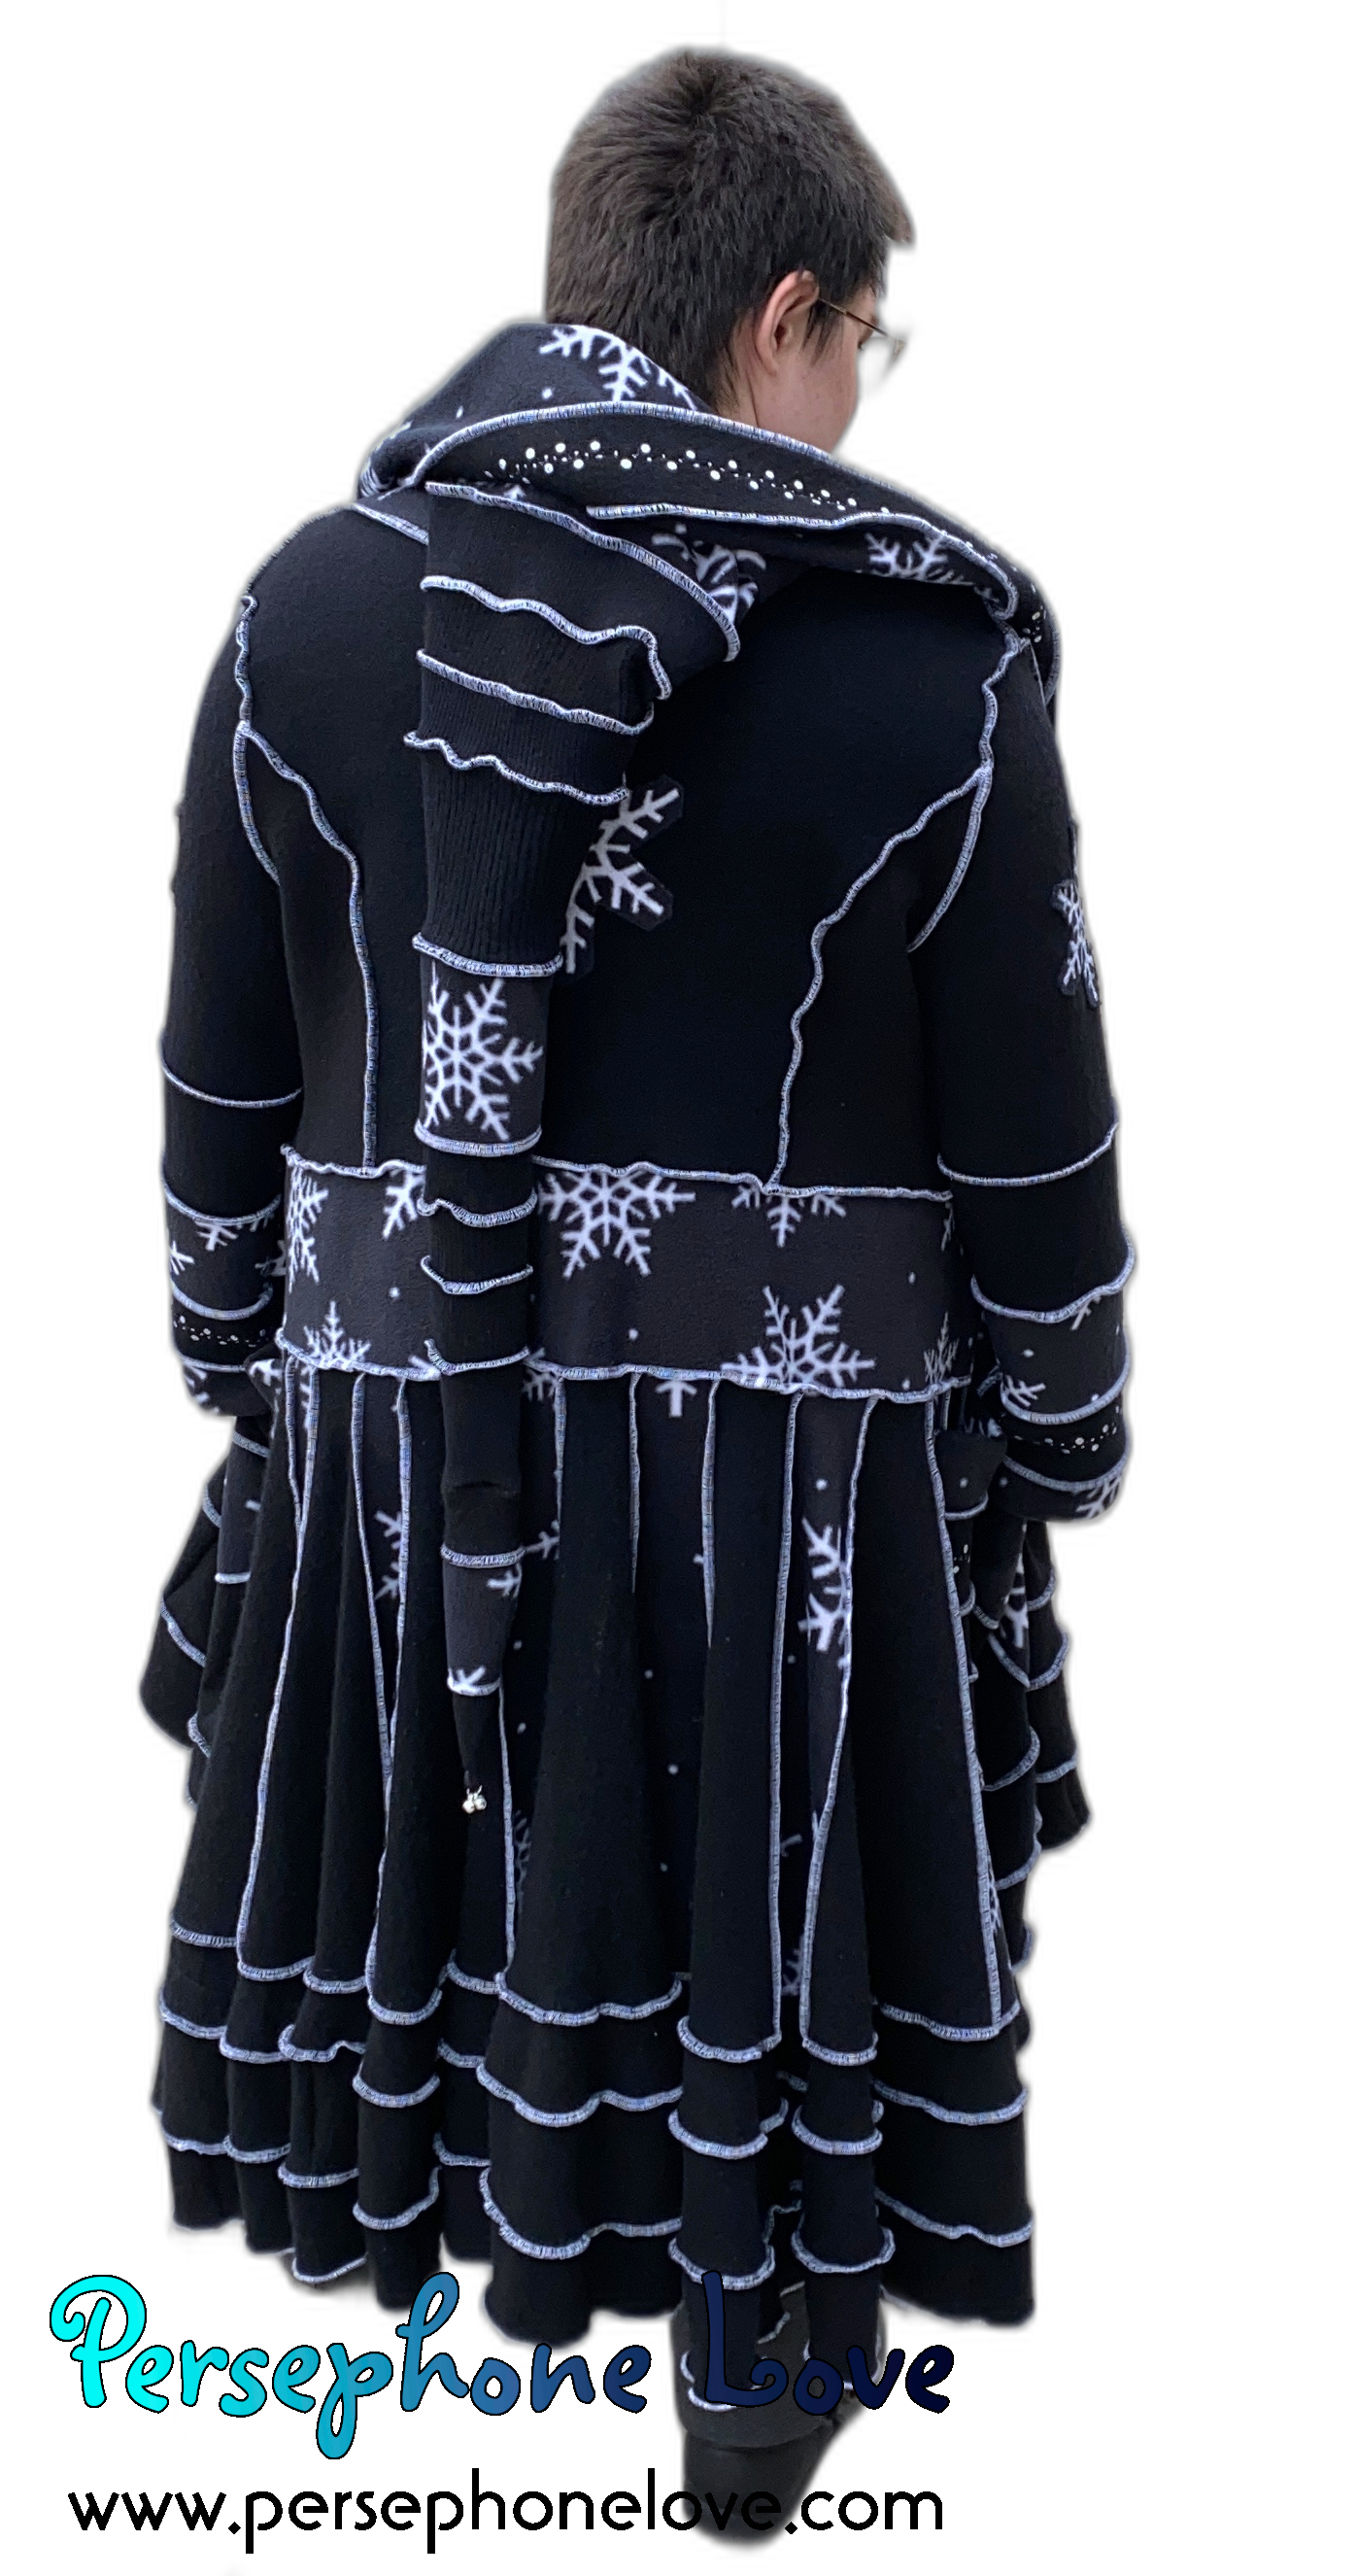 "Midnight" GODDESS SIZE Black/white snowflake embroidered/felted/sequins cashmere patchwork Katwise-inspired sweatercoat-2543